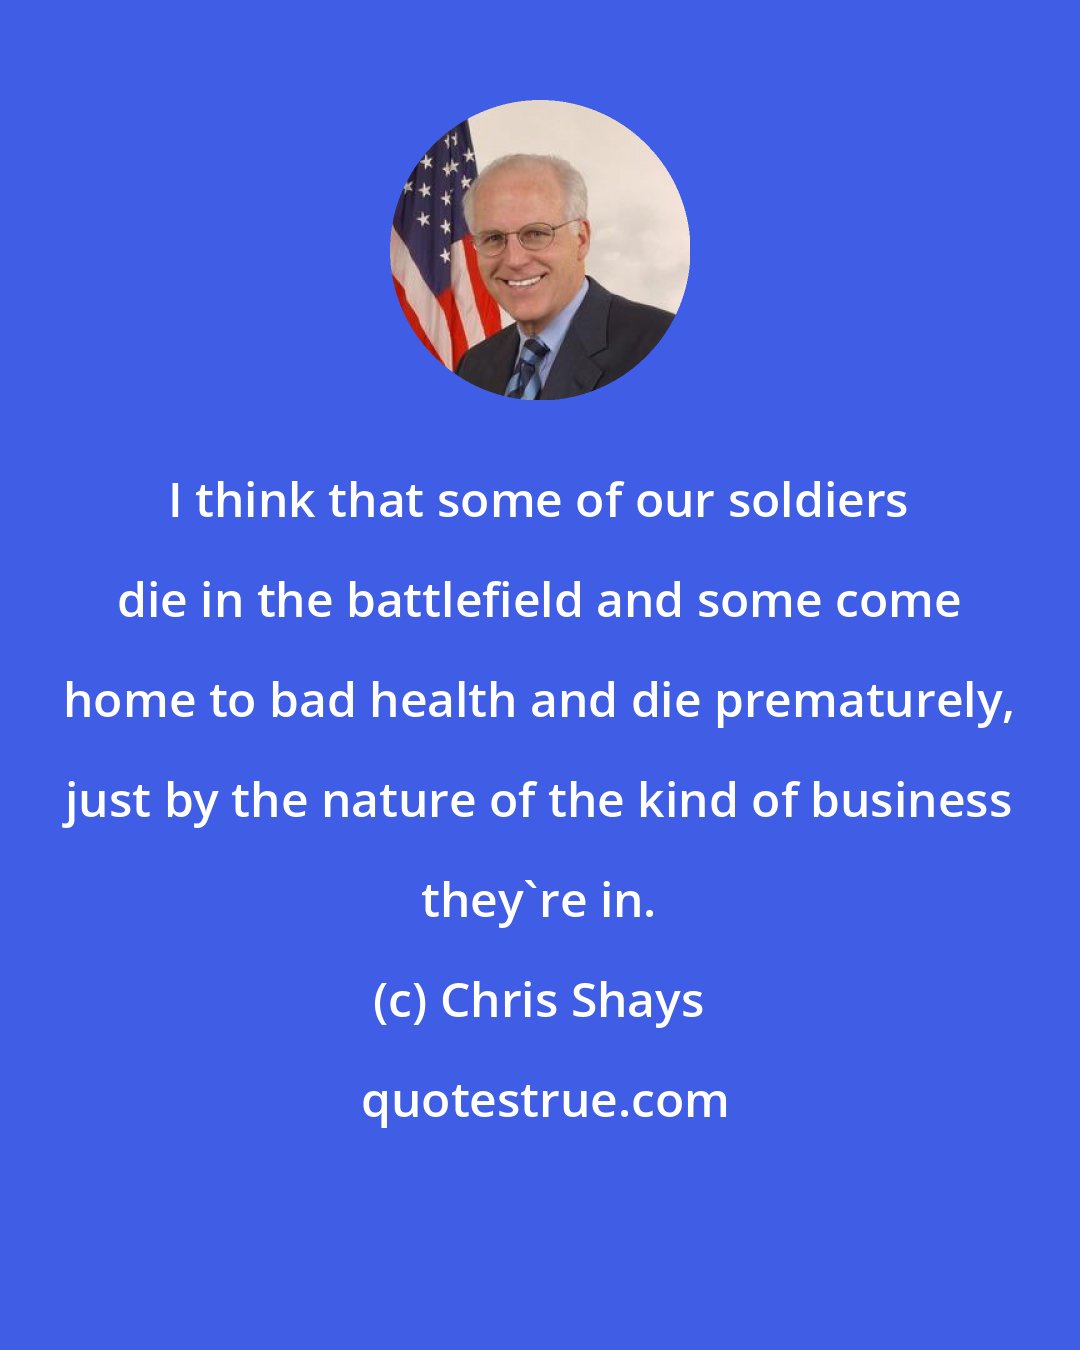 Chris Shays: I think that some of our soldiers die in the battlefield and some come home to bad health and die prematurely, just by the nature of the kind of business they're in.